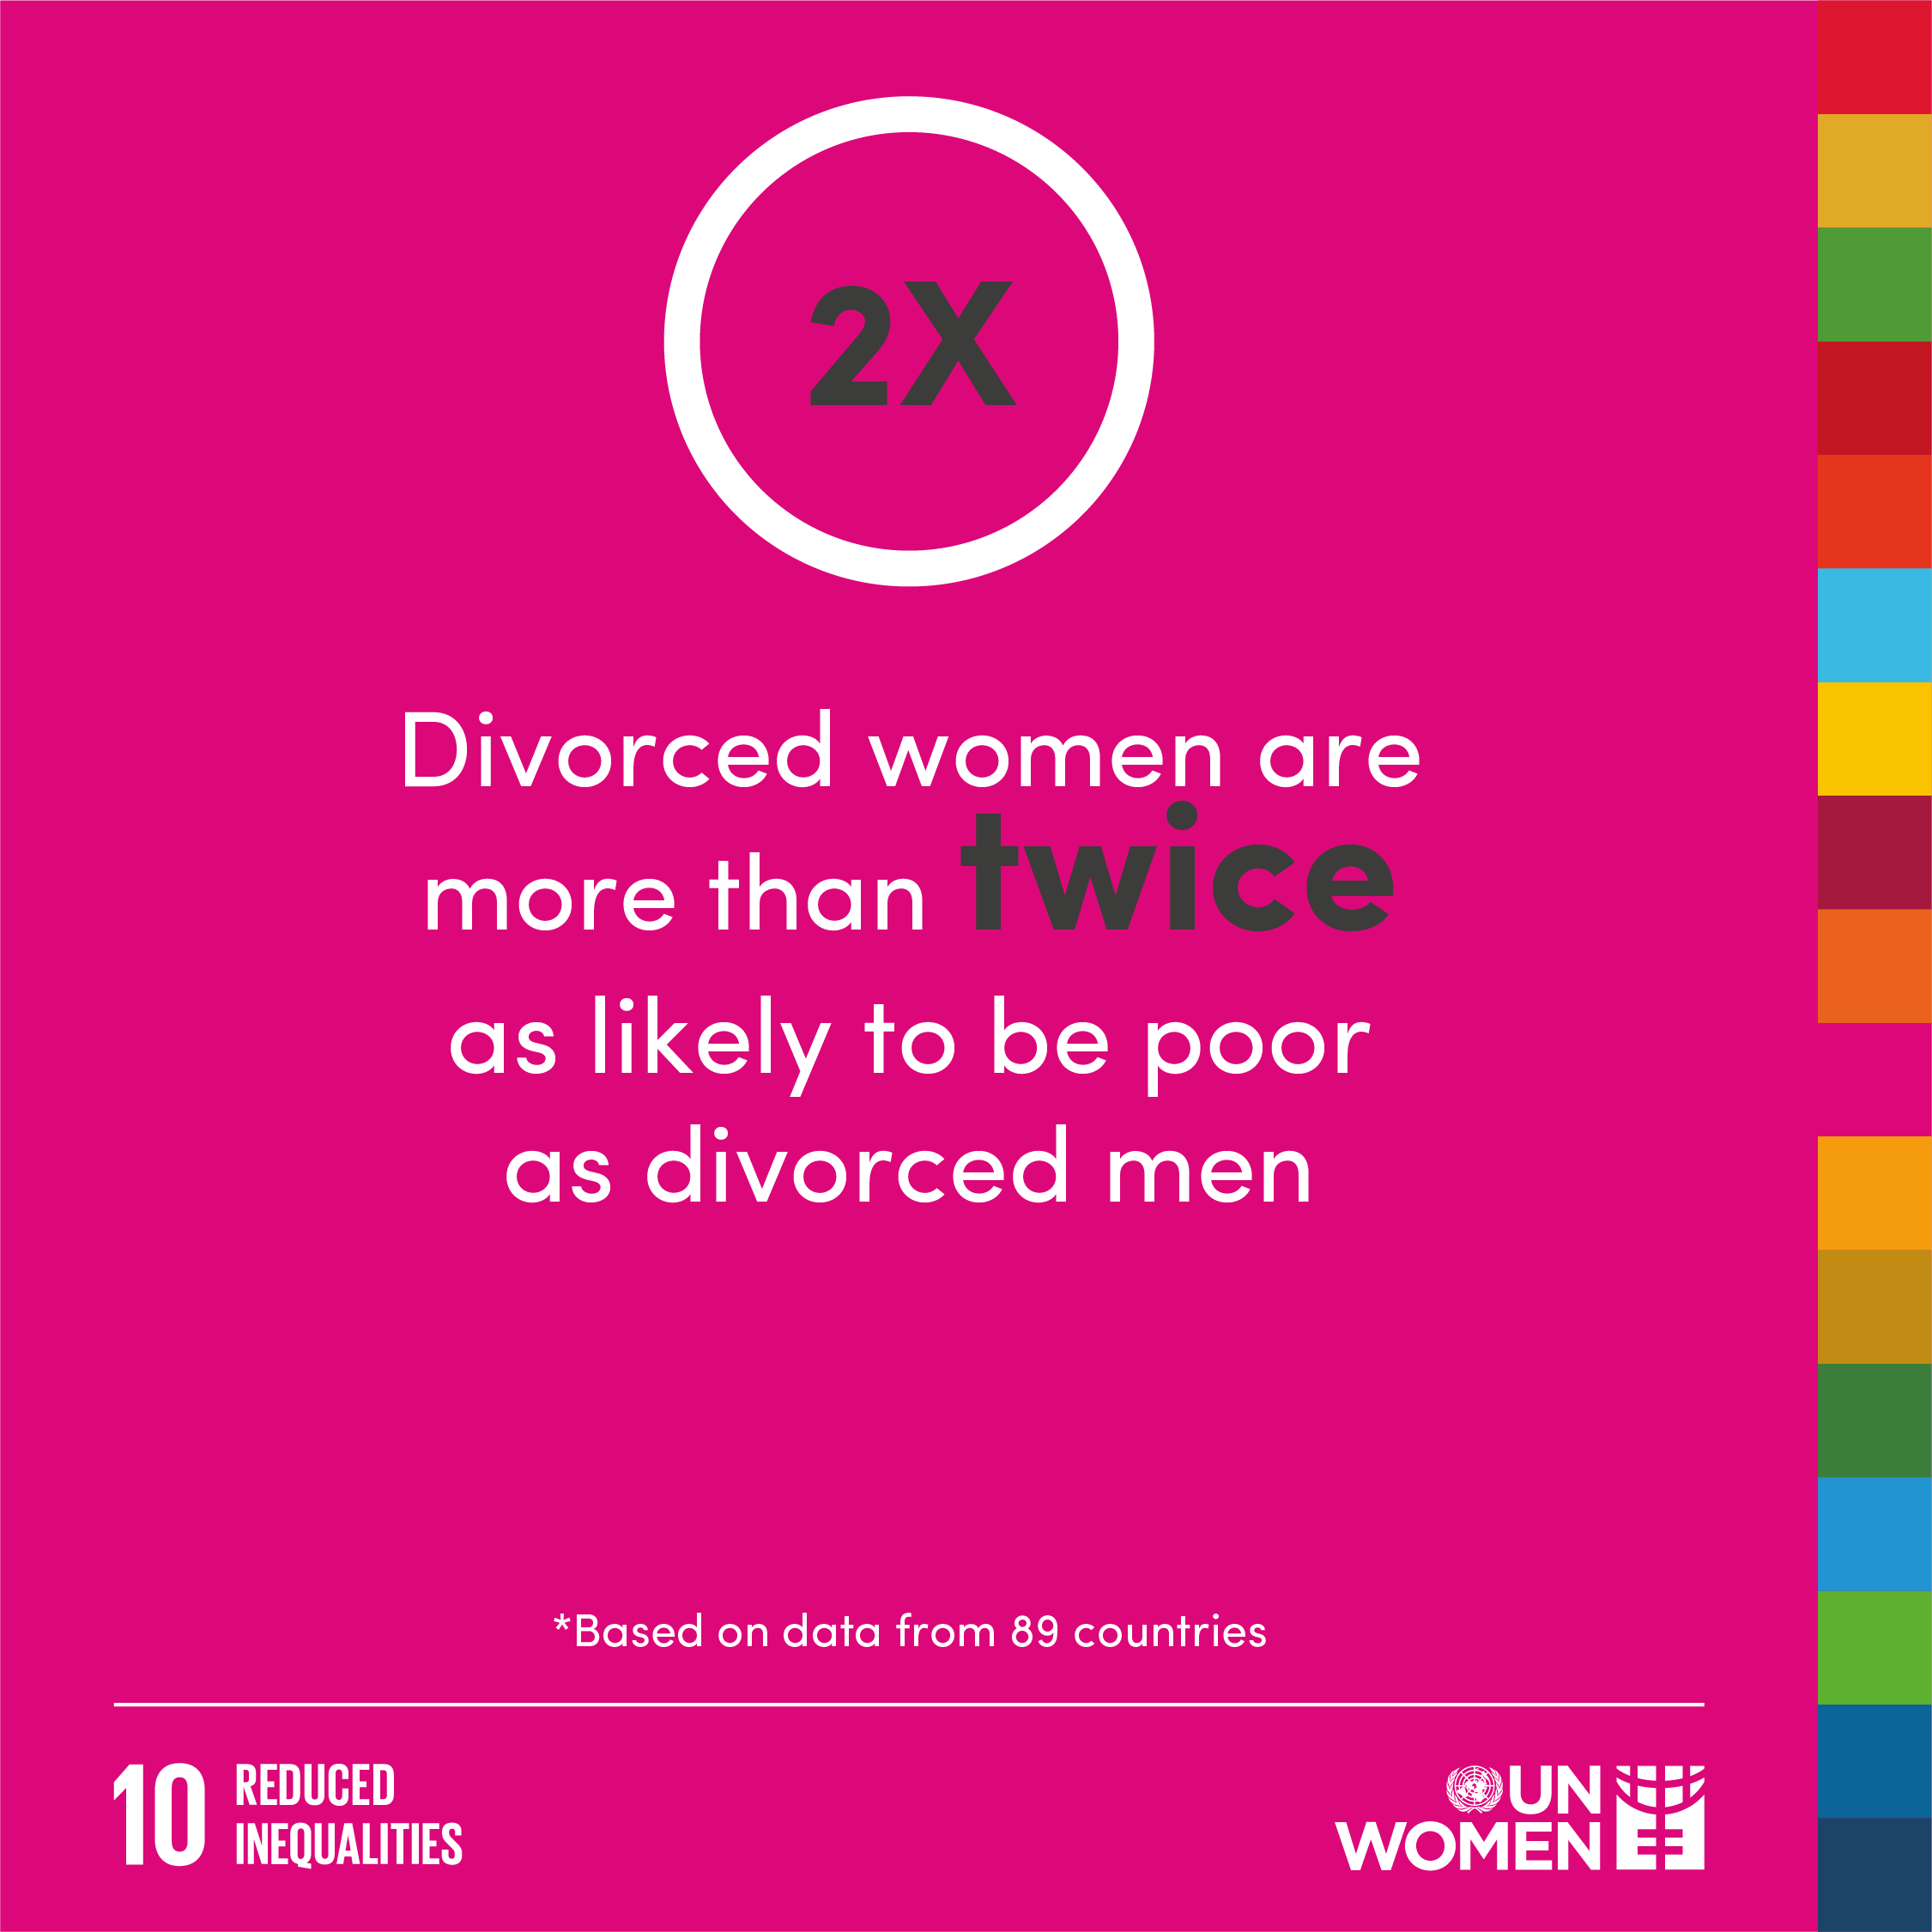 Divorced women are more than twice as likely to be poor as divorced men.